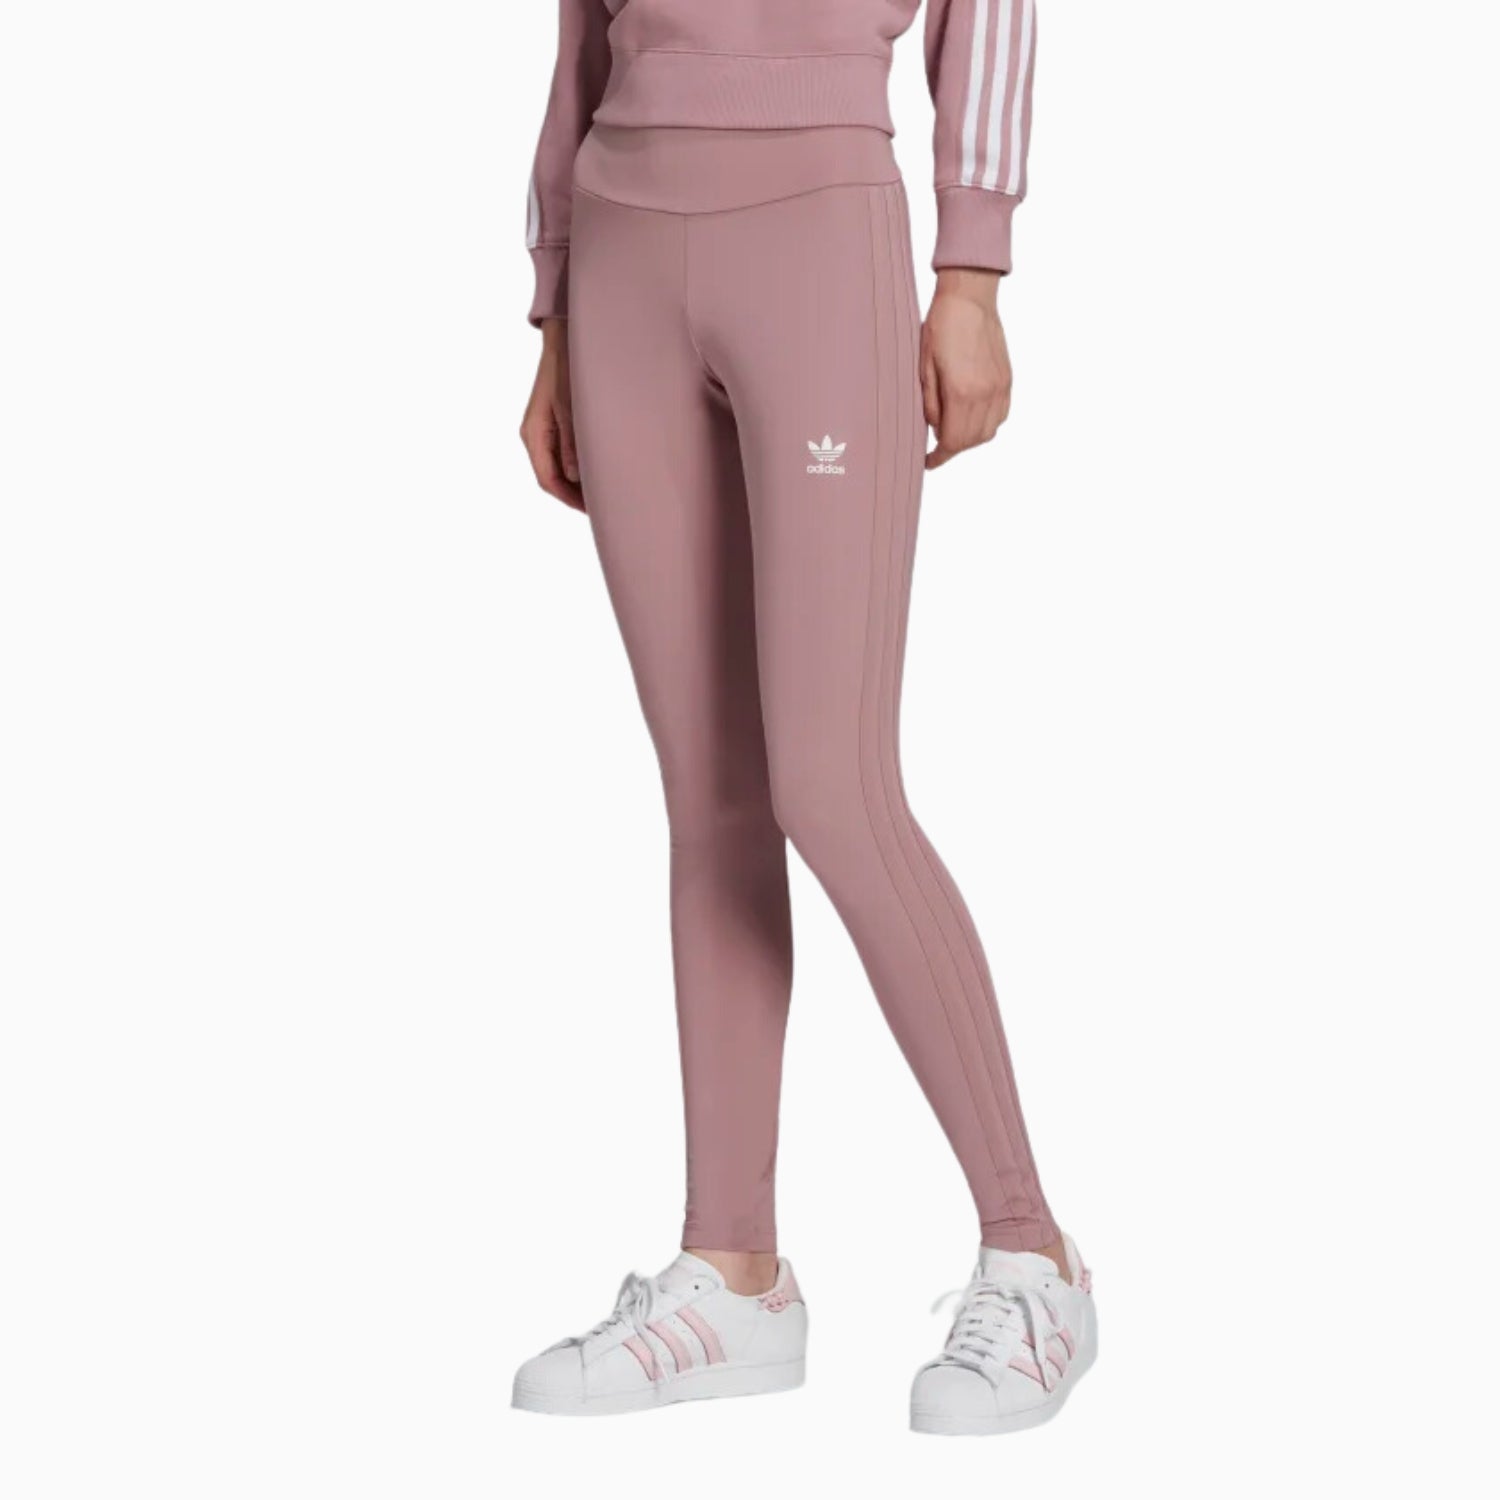 adidas-womens-trefoil-3-stripes-outfit-he9536-hc2020